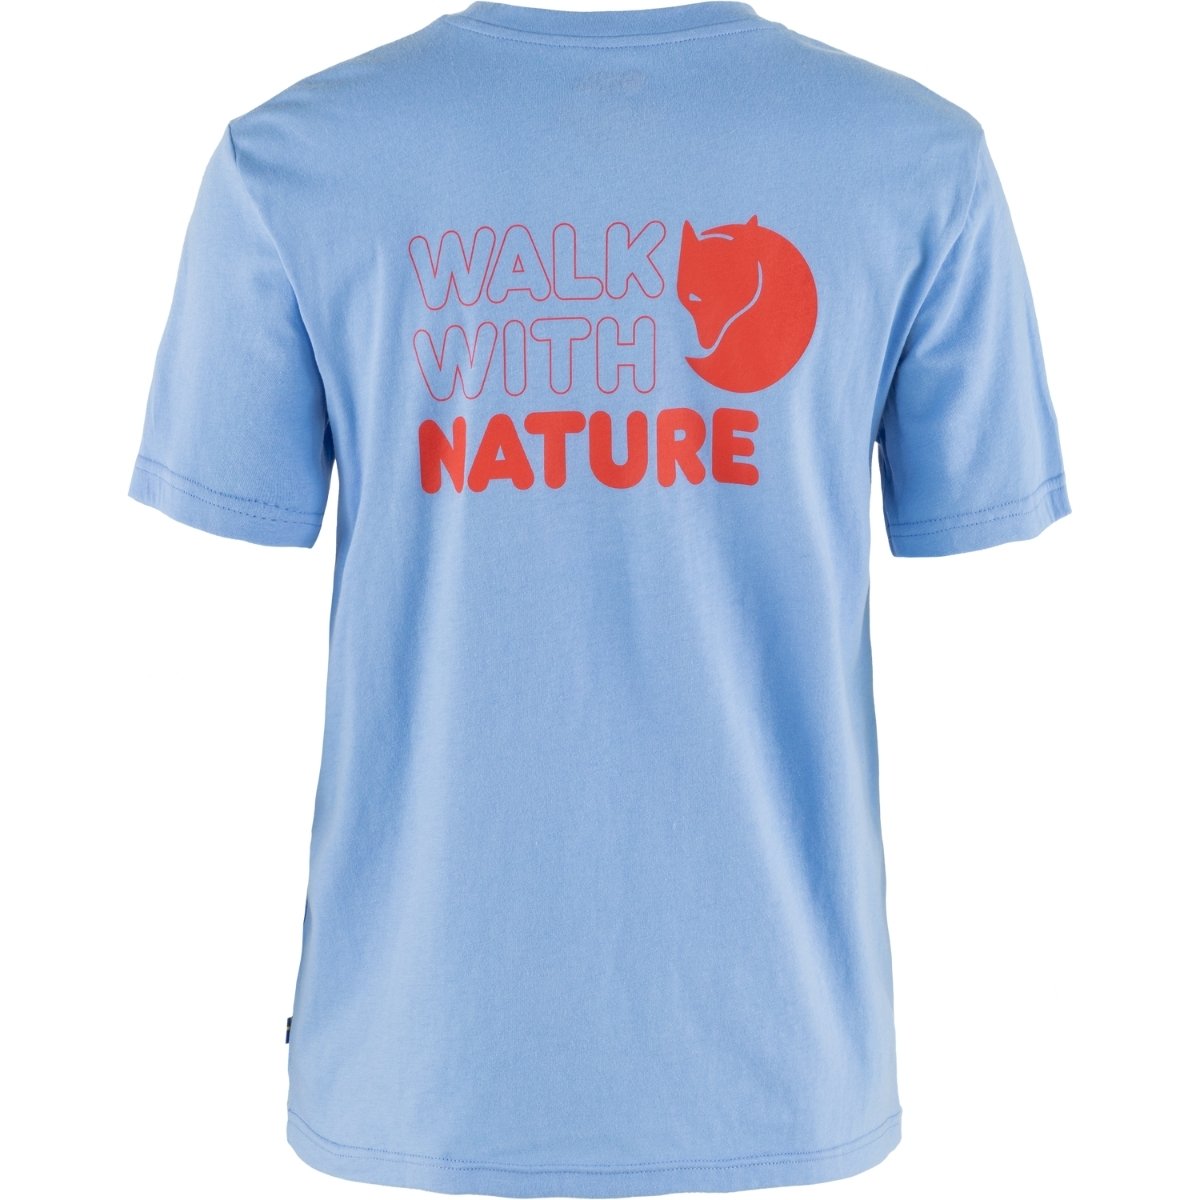 Walk With Nature T Shirt W